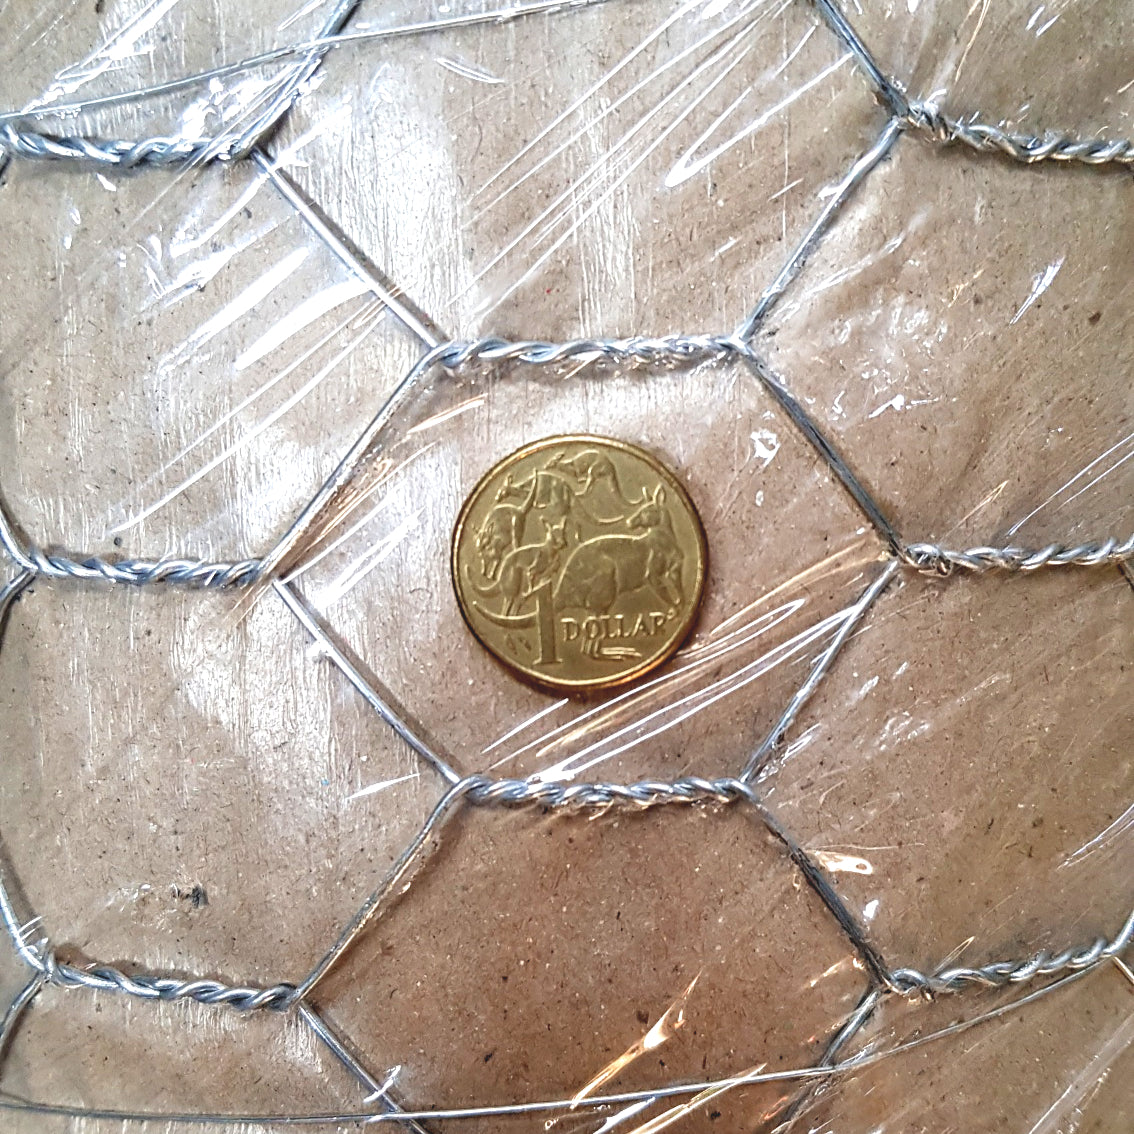 Chicken Wire (or aviary mesh) - 40mm Opening x 1200mm High x 30 Metre Roll. Australia.